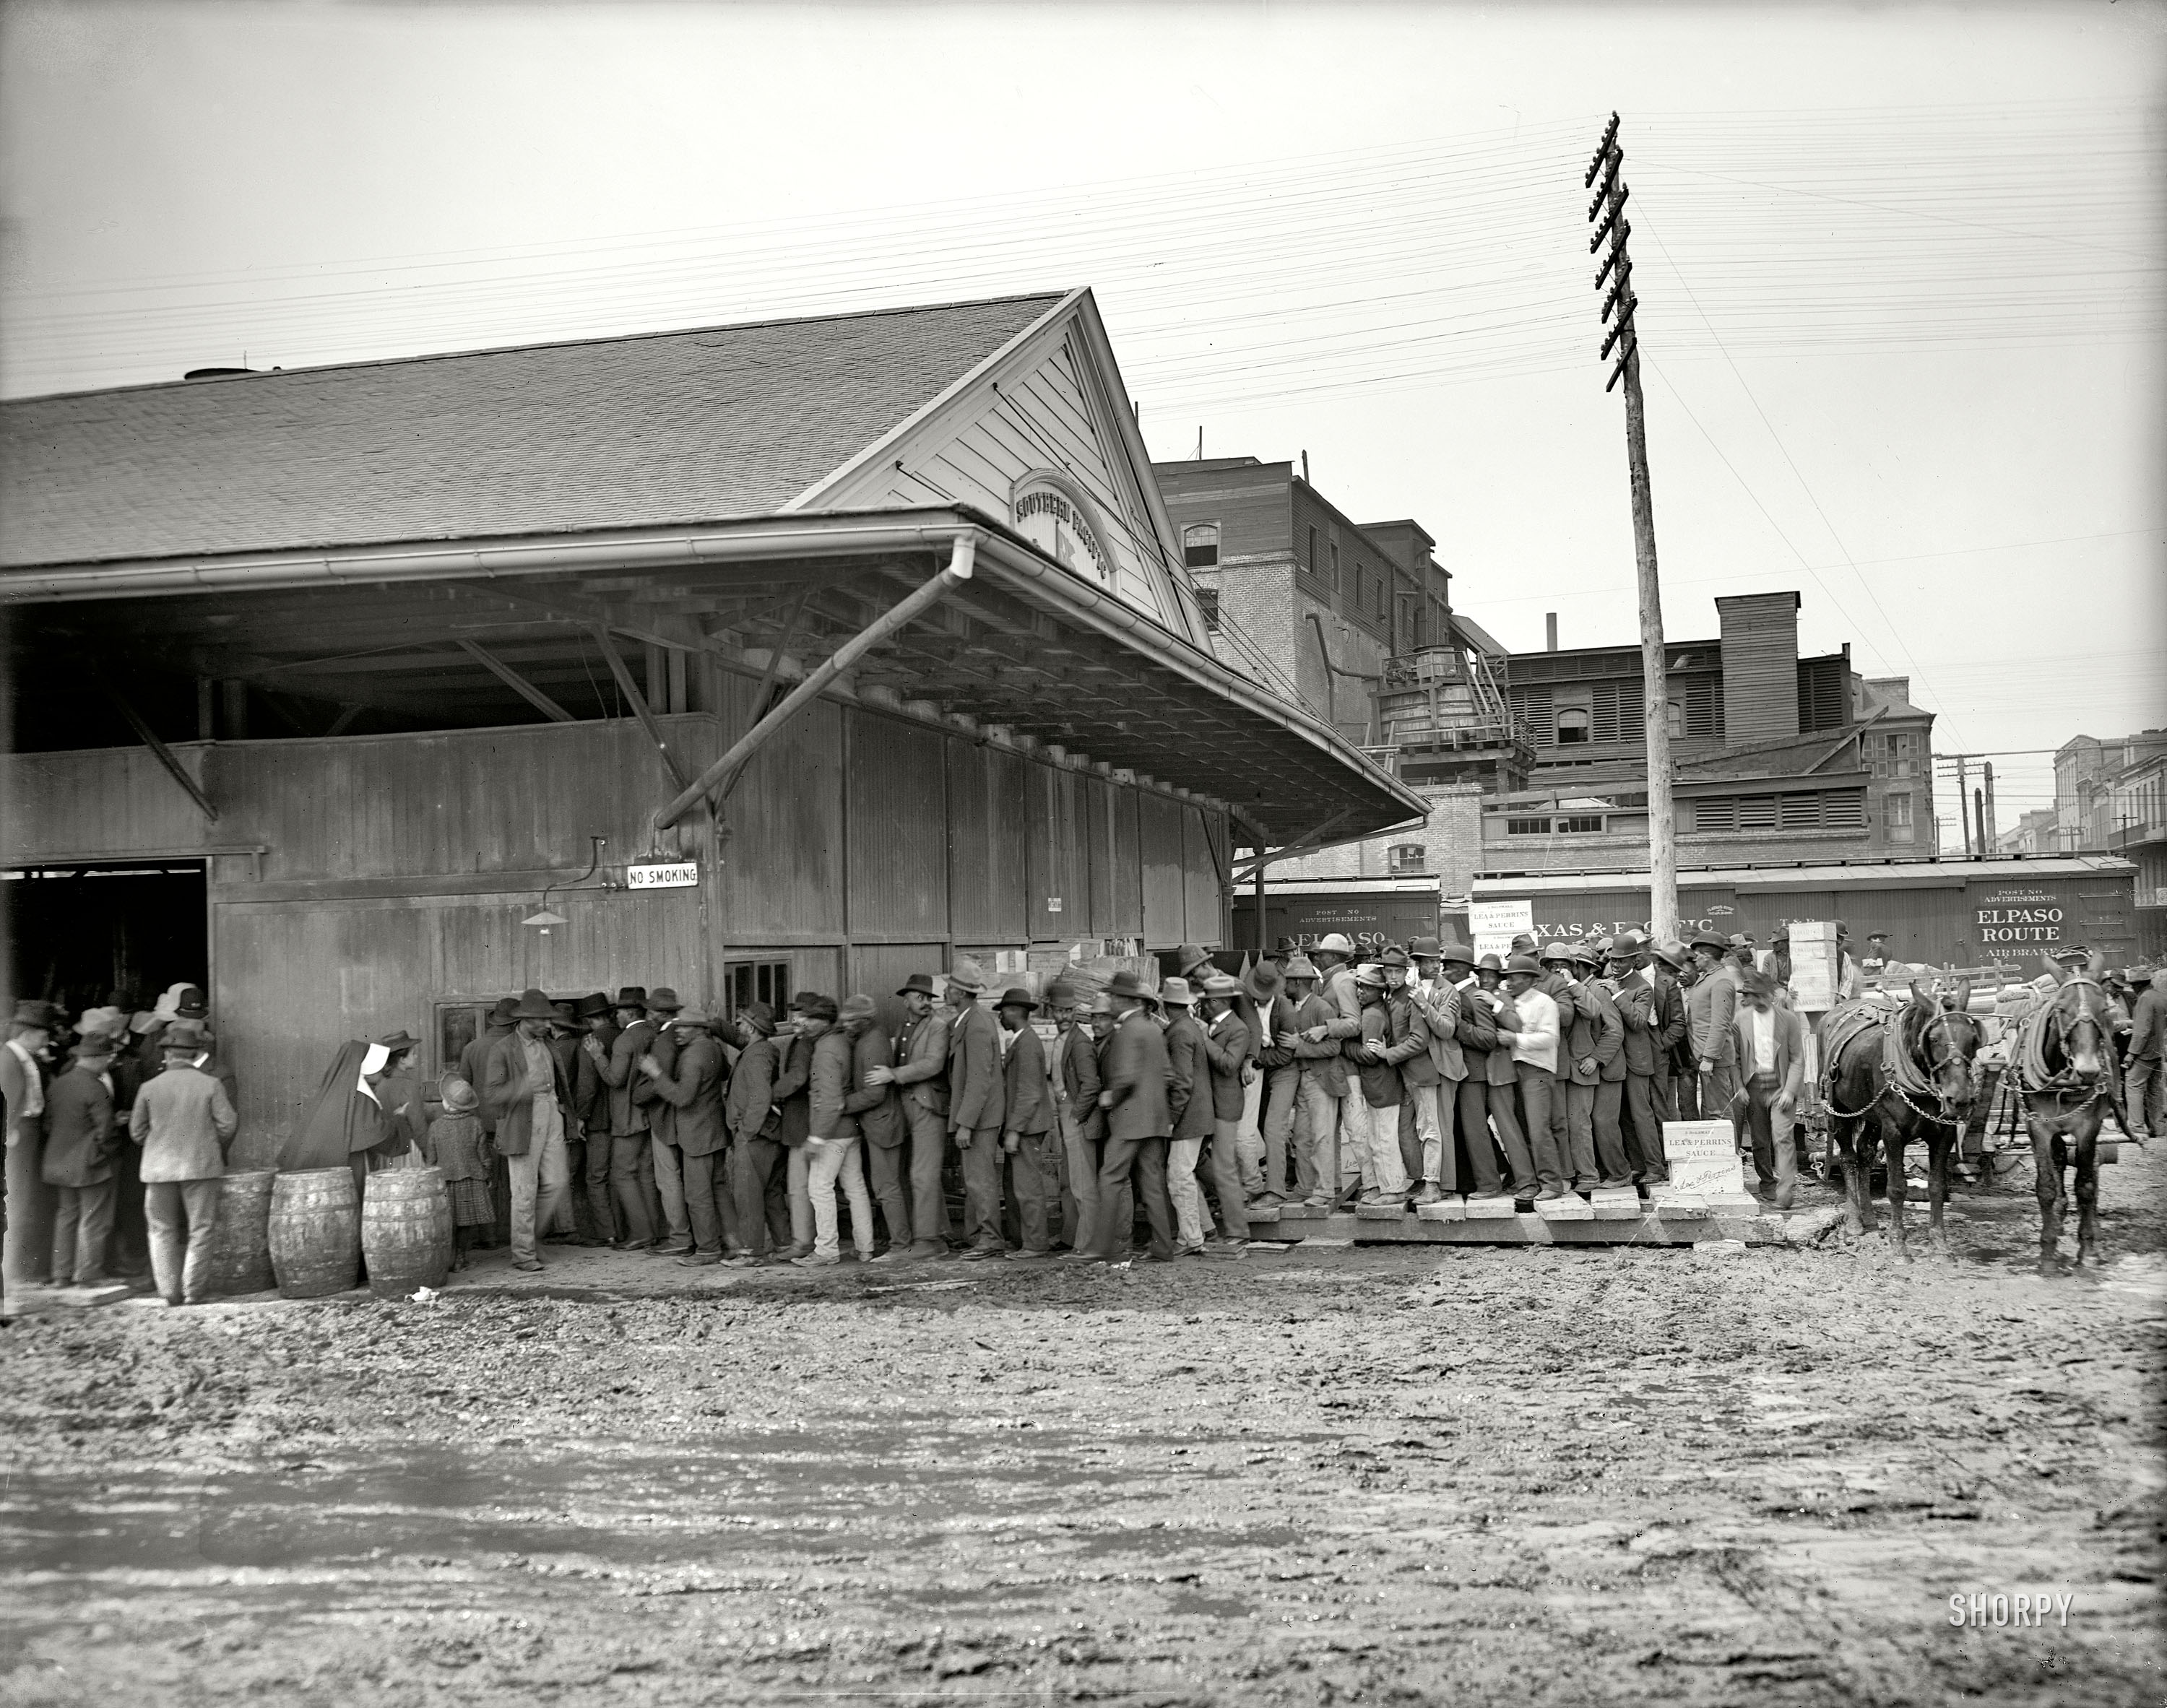 New Orleans circa 1906. "Payday on the levee." An alternate version of this post. 8x10 inch dry plate glass negative, Detroit Publishing Company. View full size.